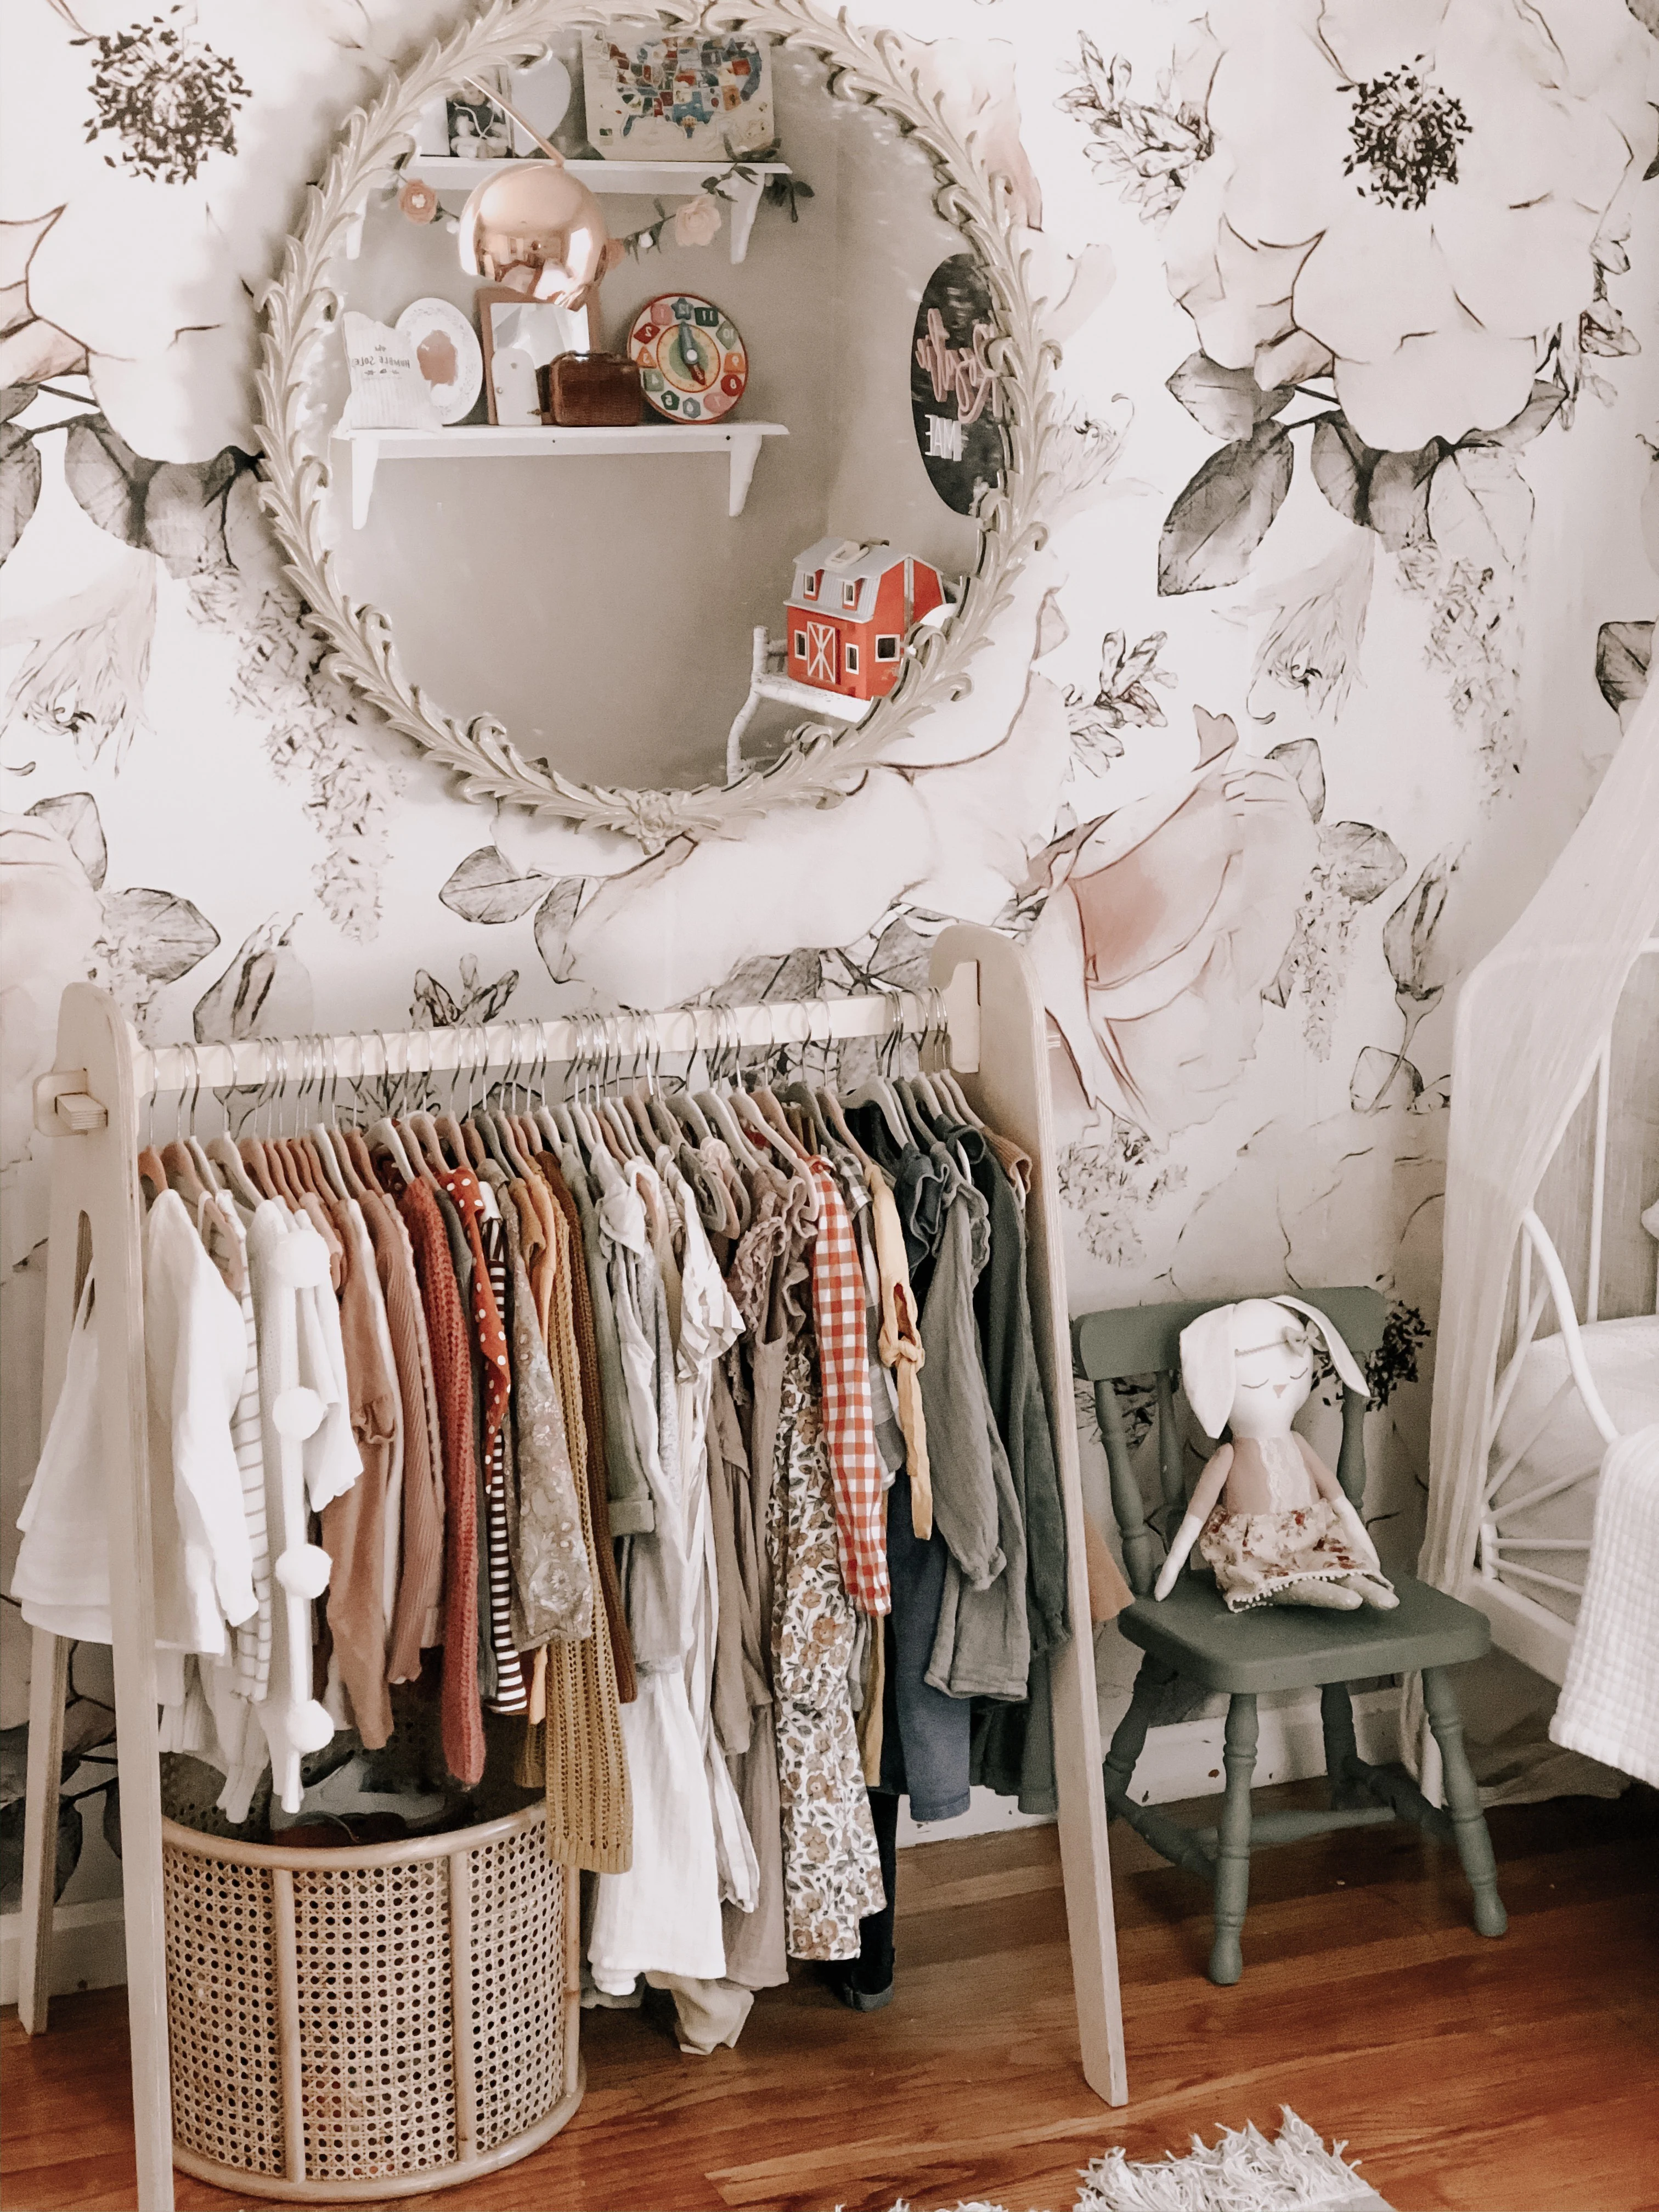 Floral Wallpaper in Girl's Room with Free Standing Clothes Rack